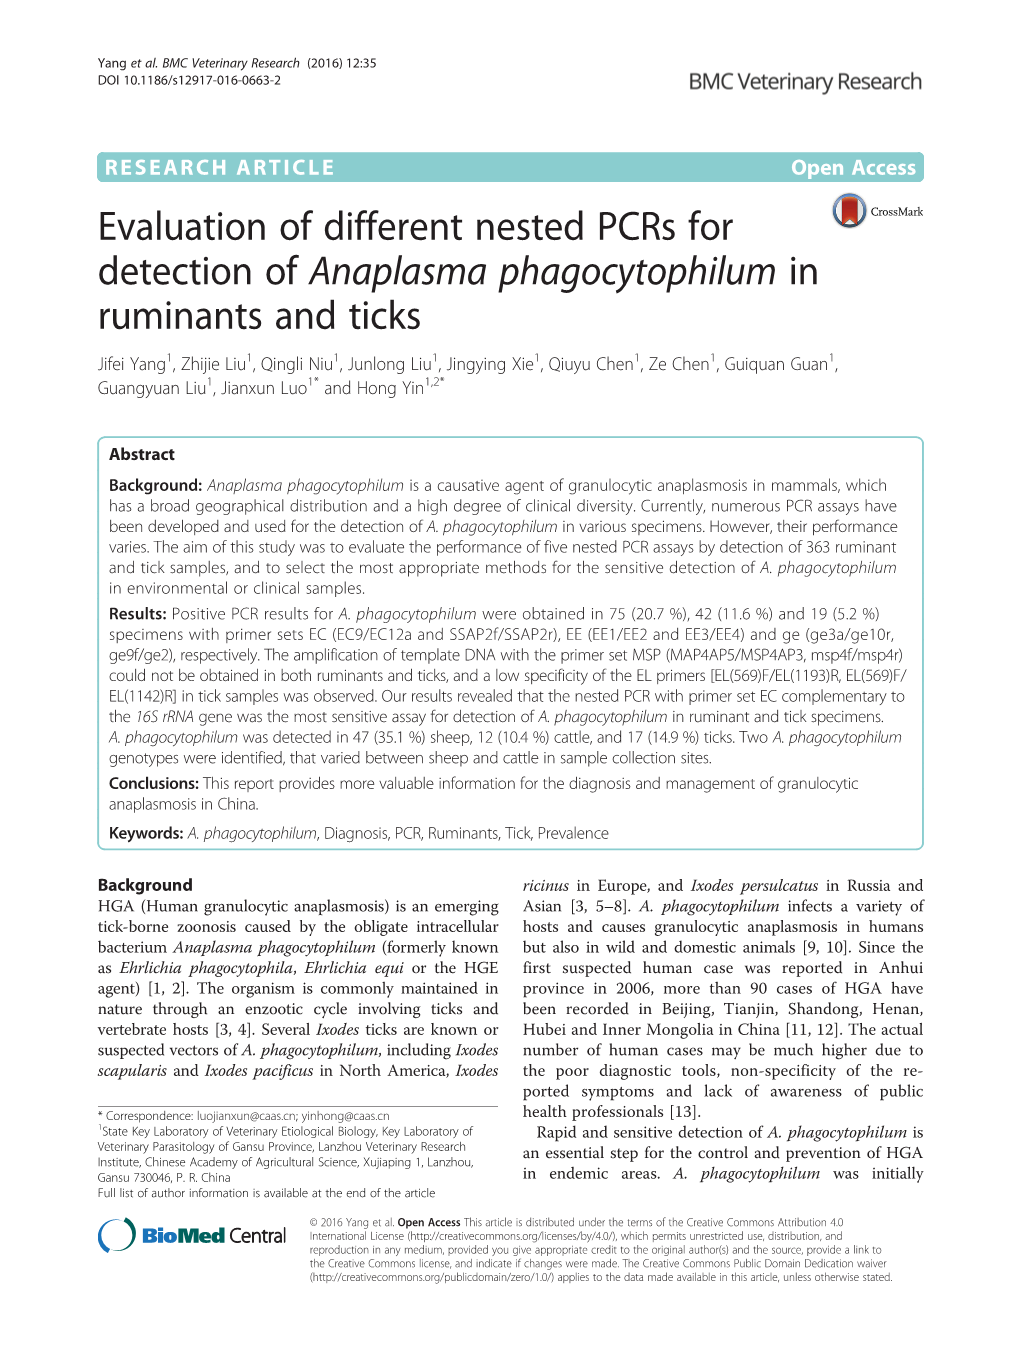 Evaluation of Different Nested Pcrs for Detection of Anaplasma